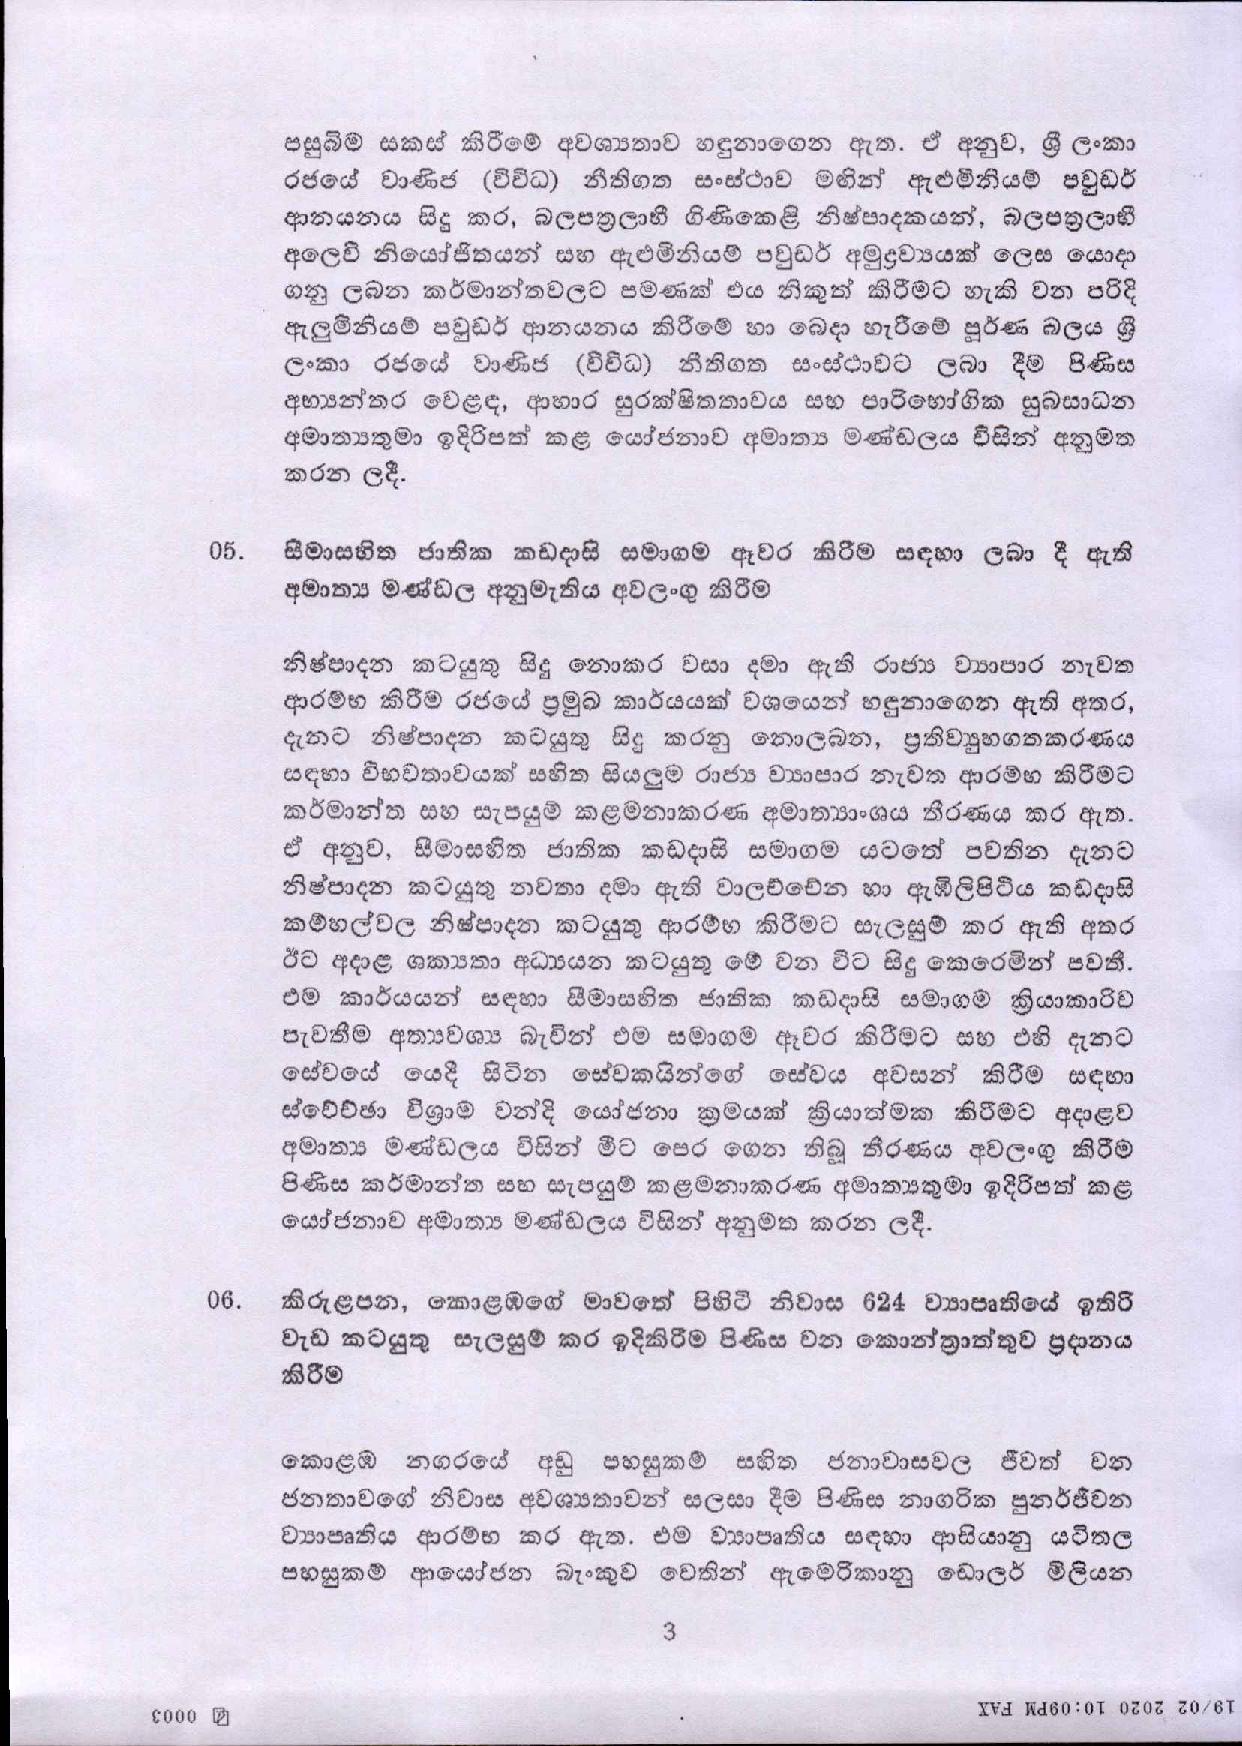 3 Cabinet Decision on 19.02.2020 Full document page 003